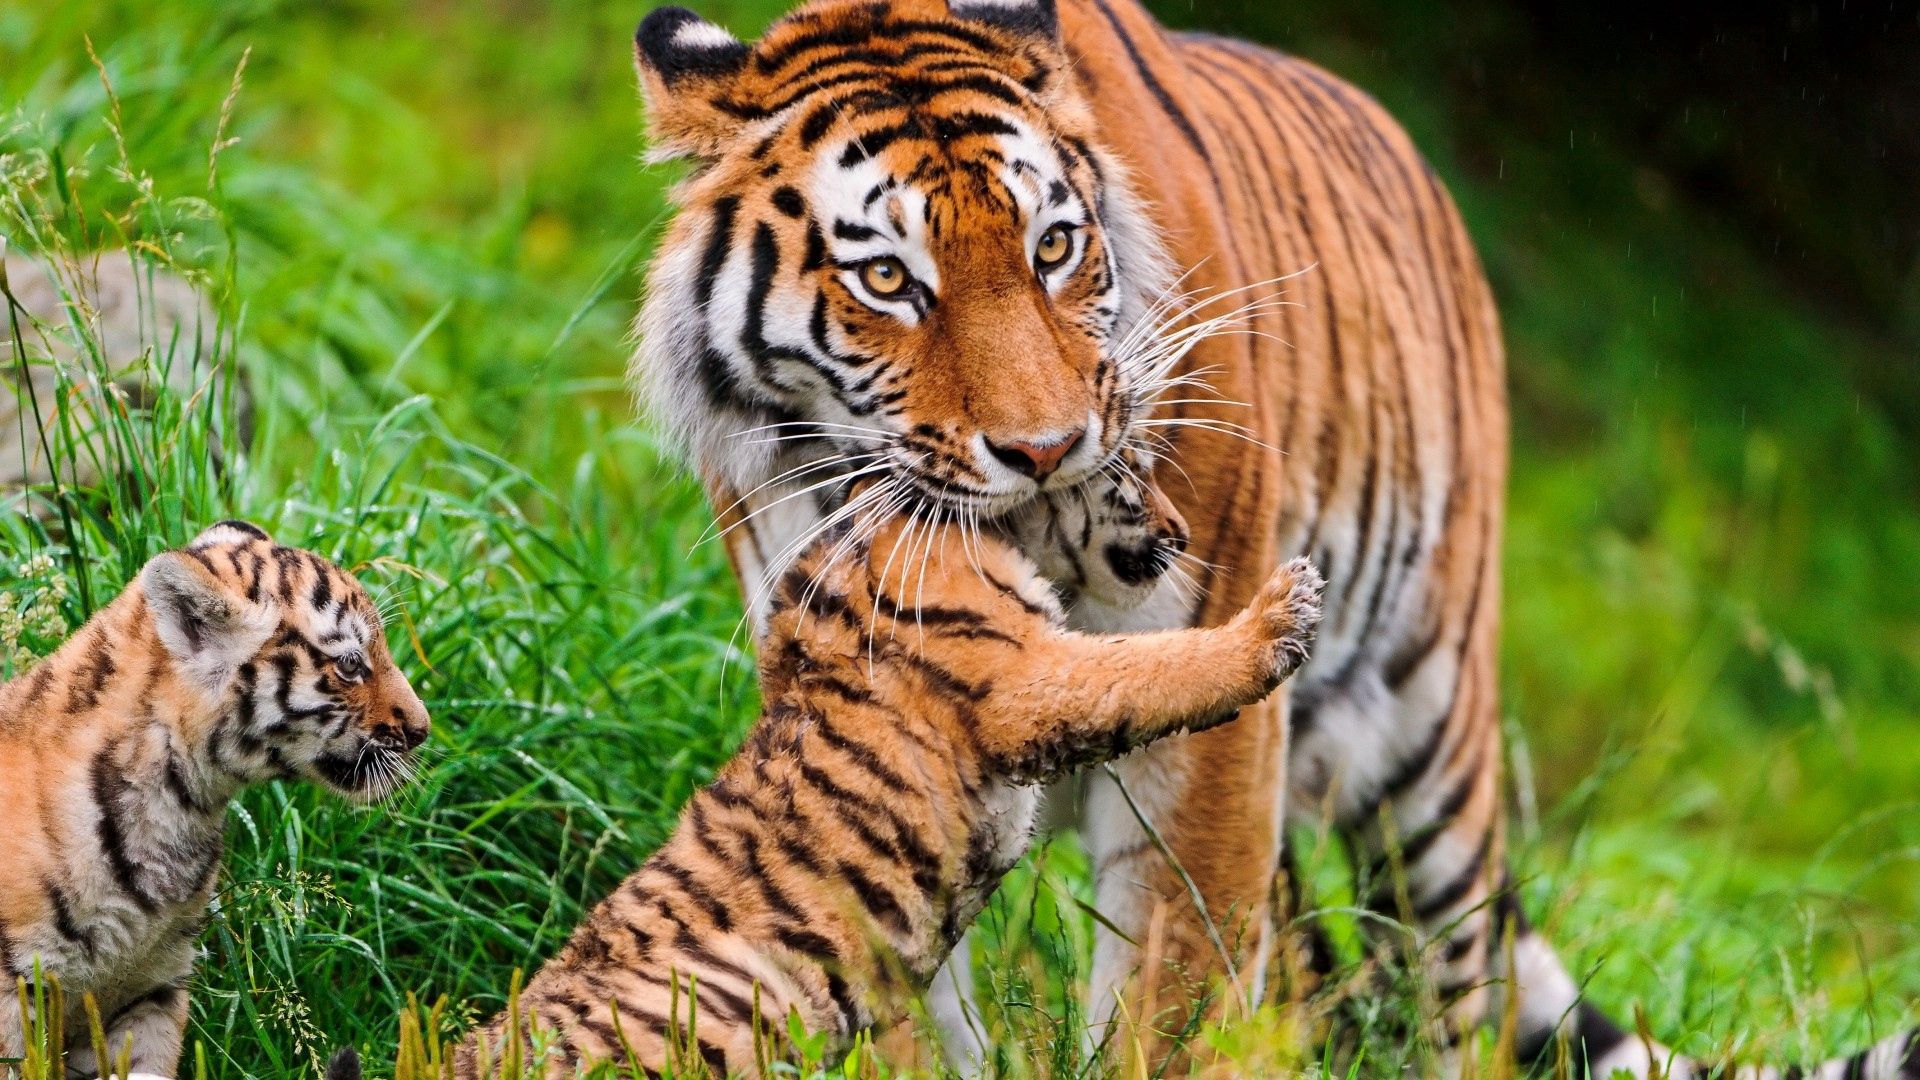 animals, young, grass, tiger, care, cubs